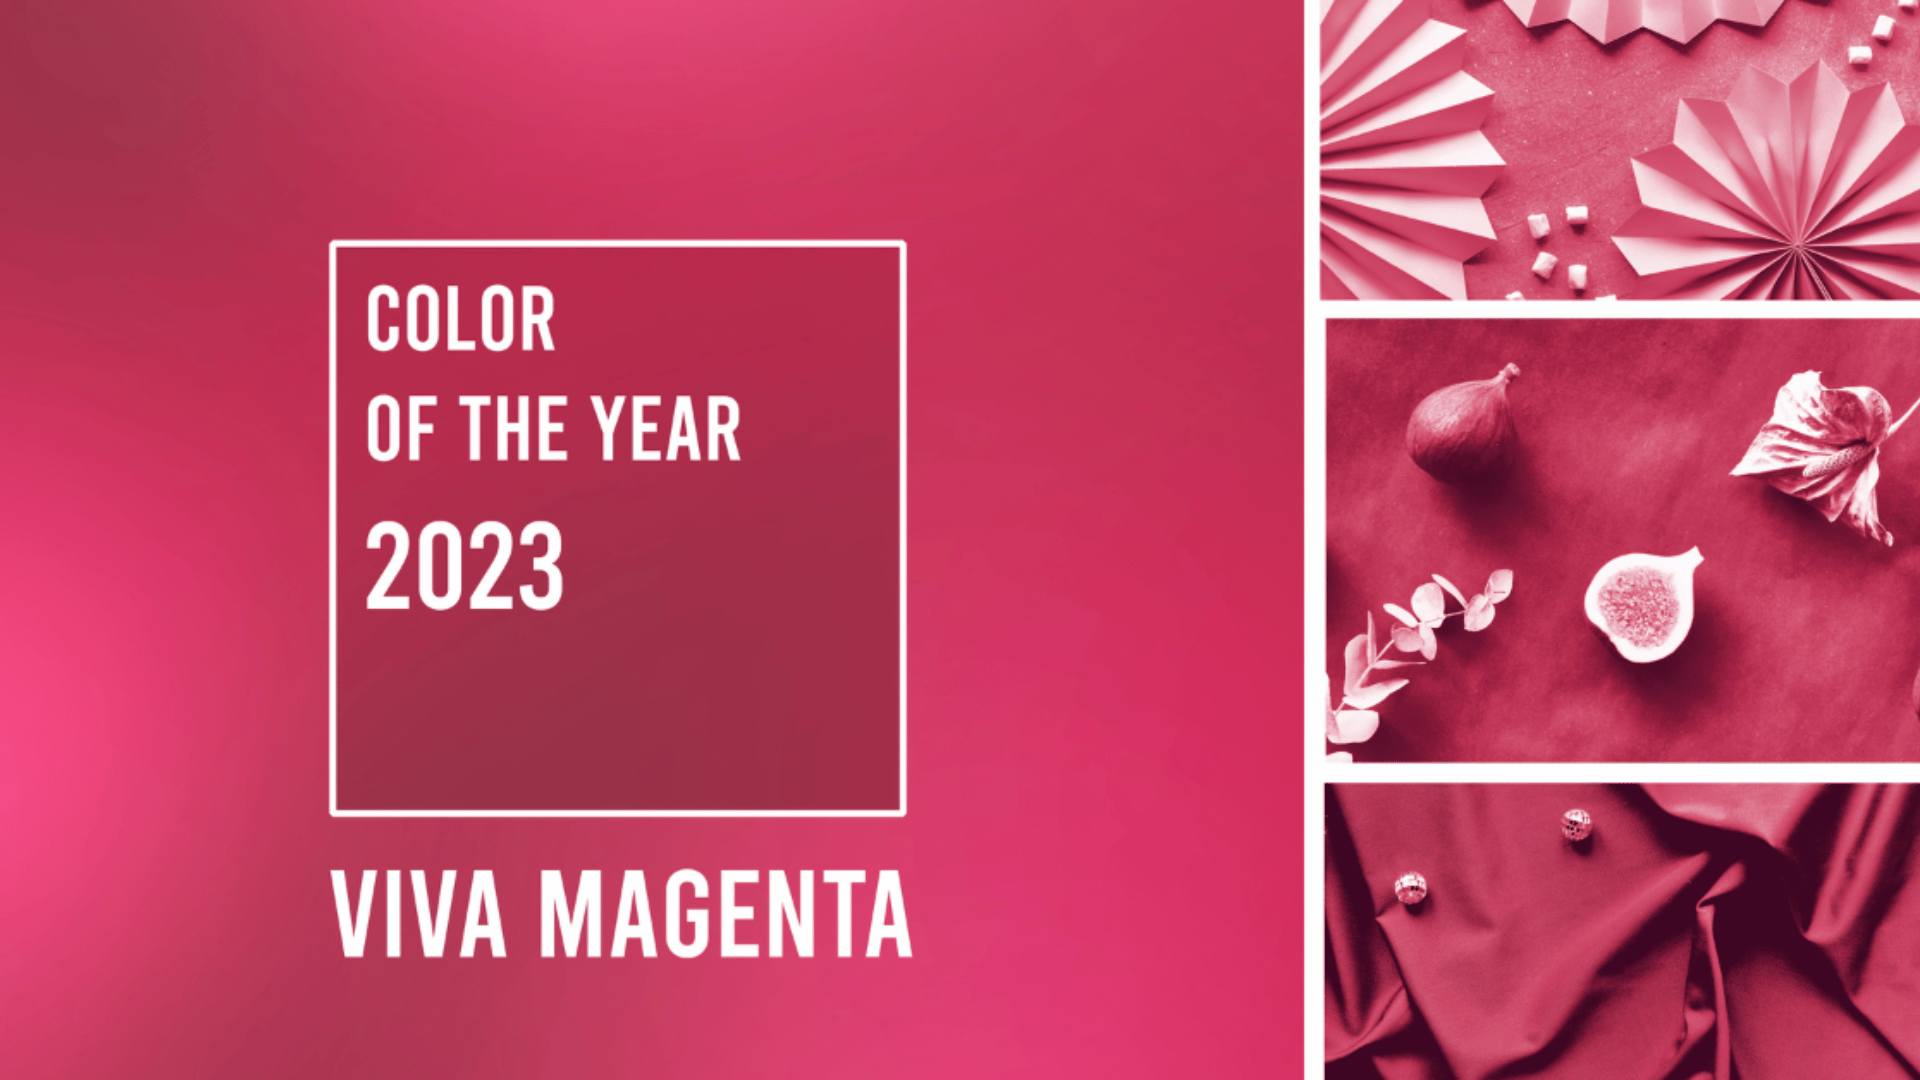 color of the year 2023, viva magenta in different shades